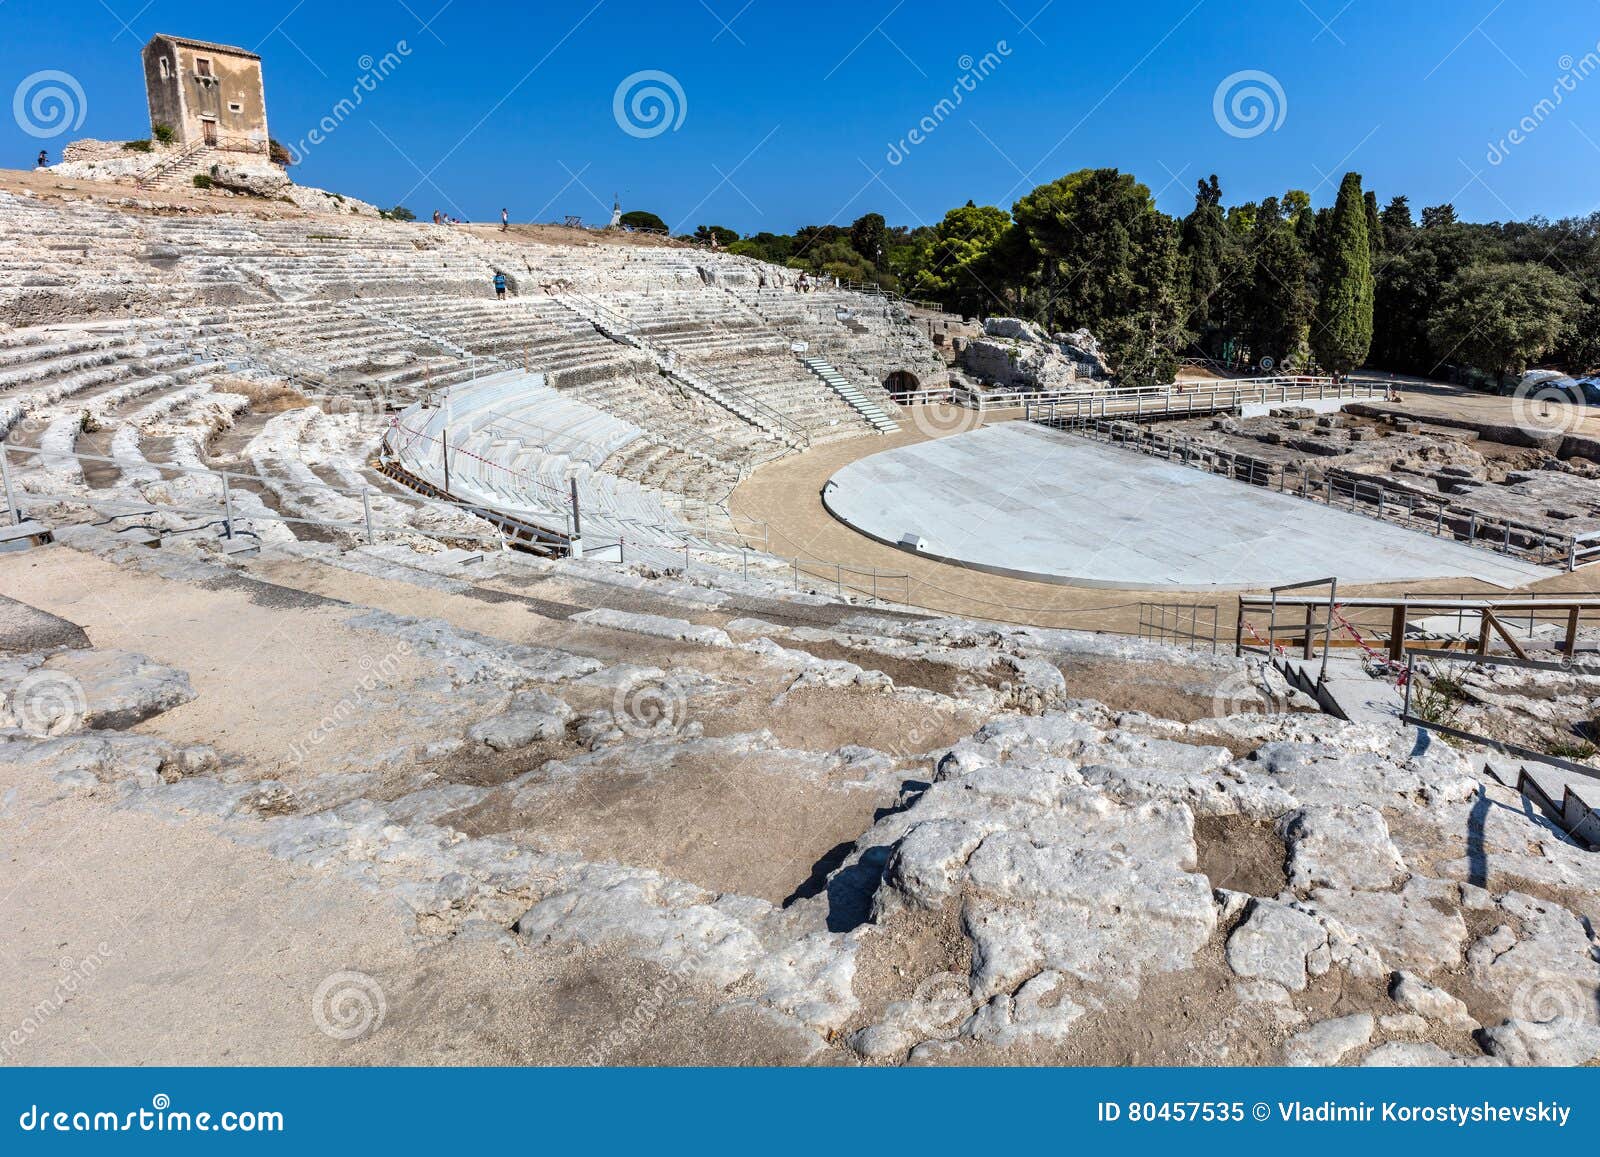 Greek Theater in Syracuse, Sicily, Italy Editorial Image - Image of